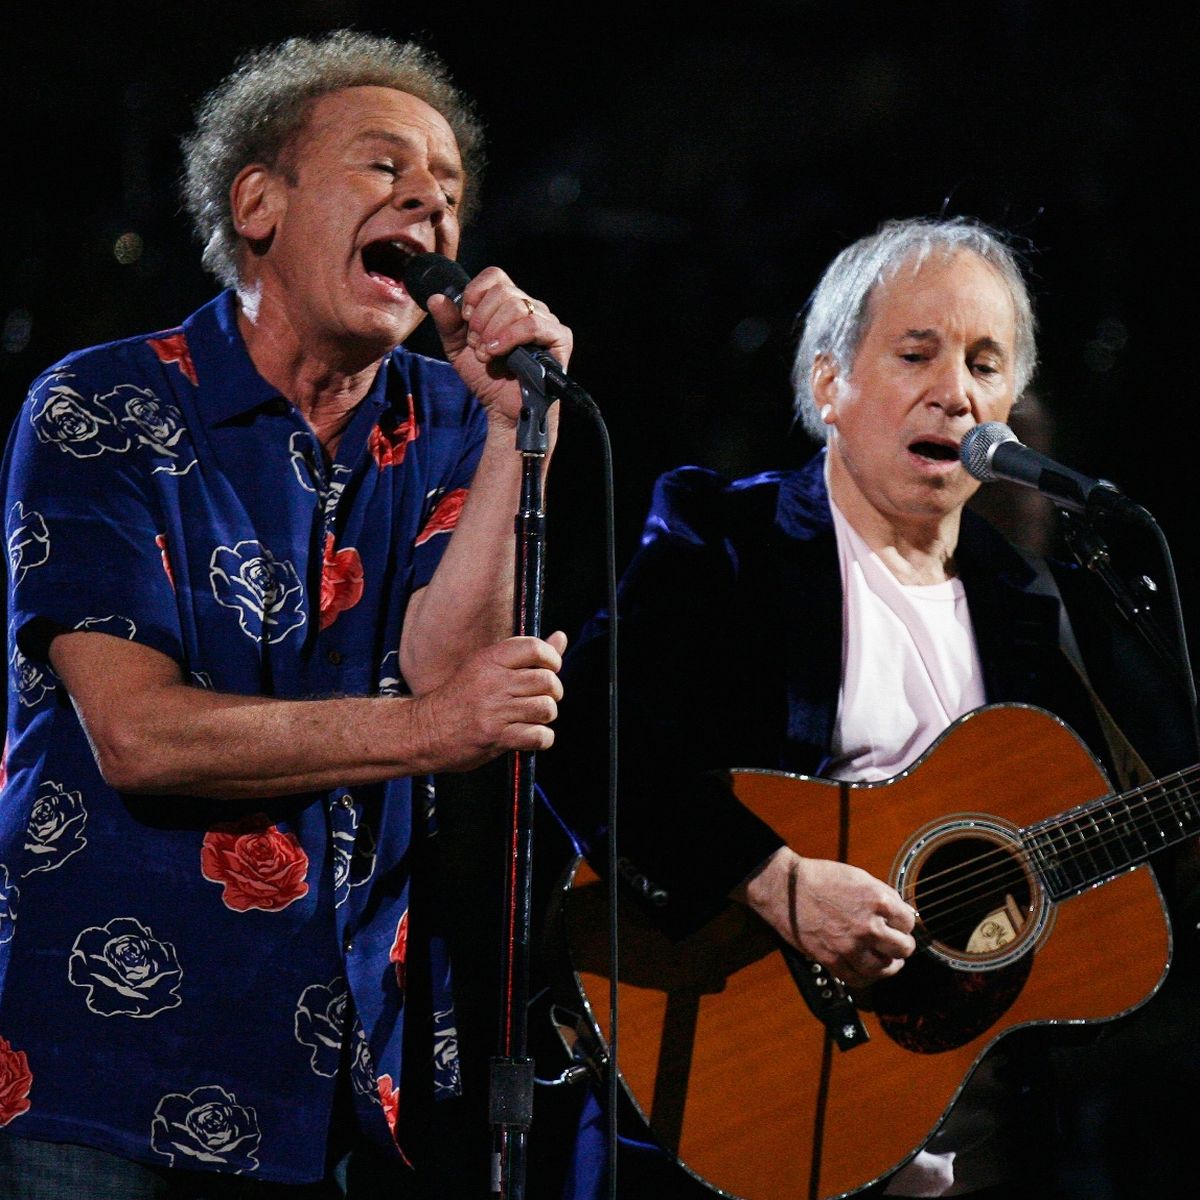 It only took 6 decades to know this about Art Garfunkel!